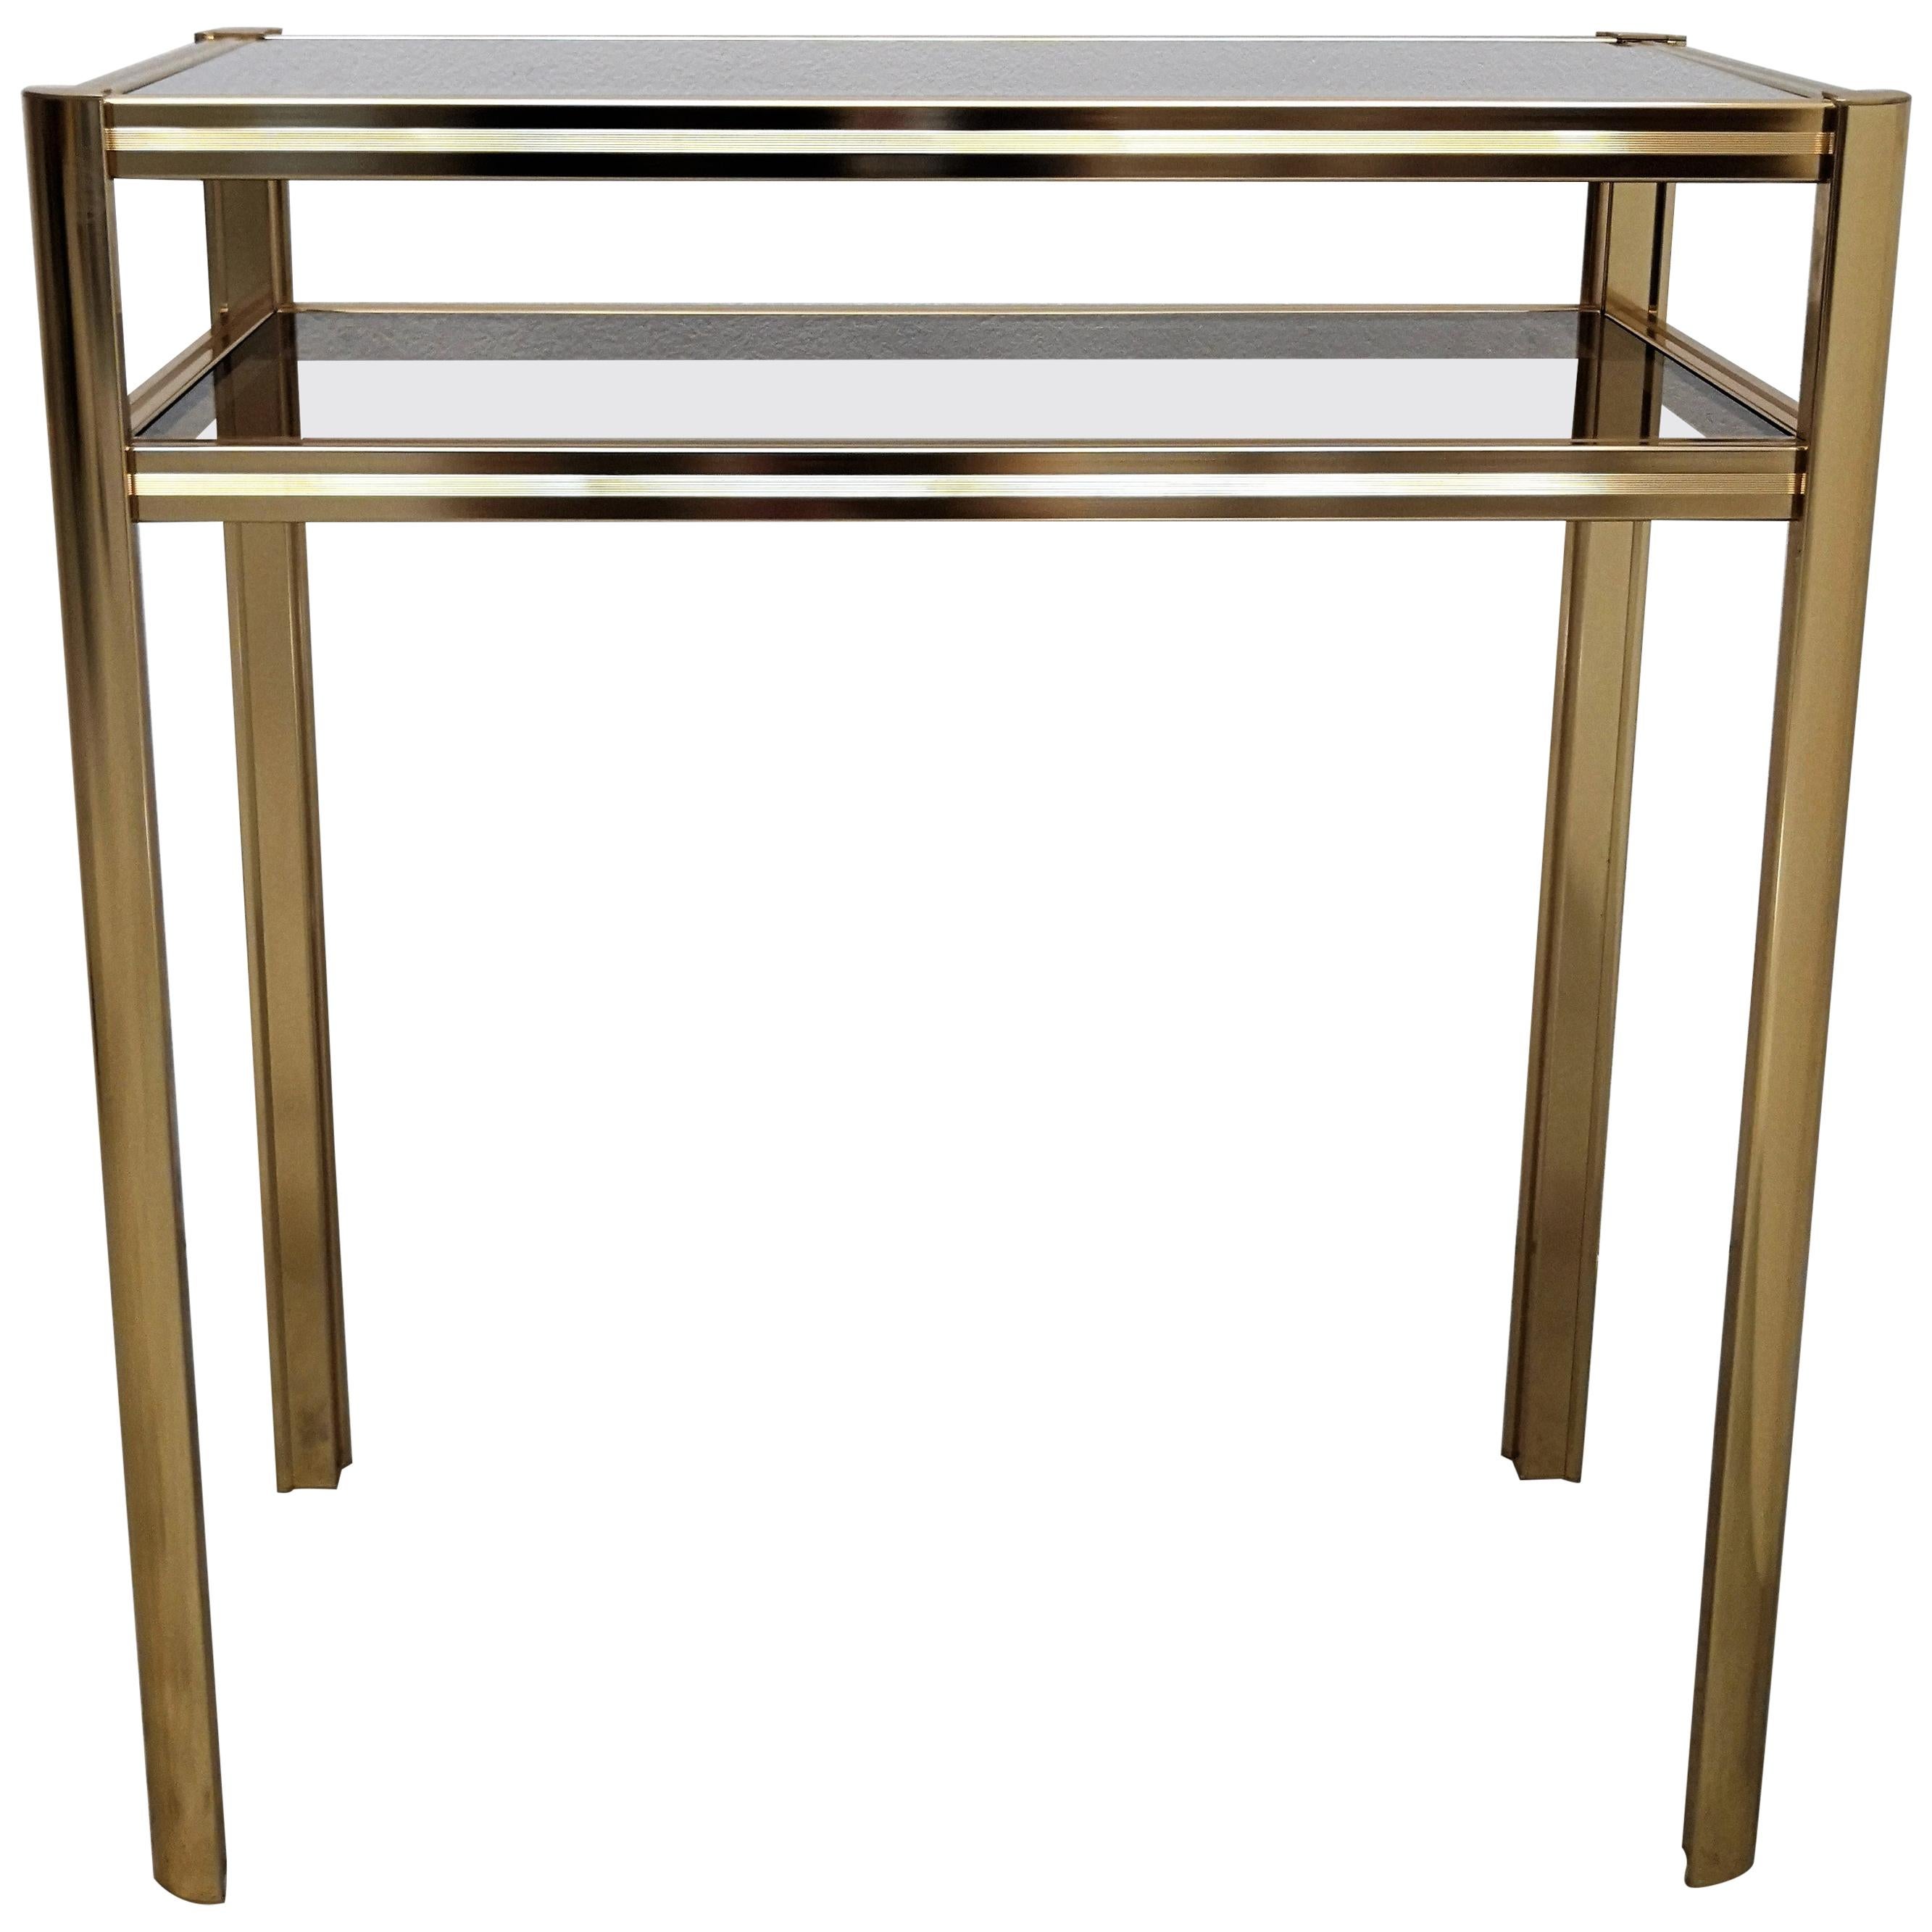 1980s Hollywood Regency Mid-Century Modern Brass and Smoked Glass Console